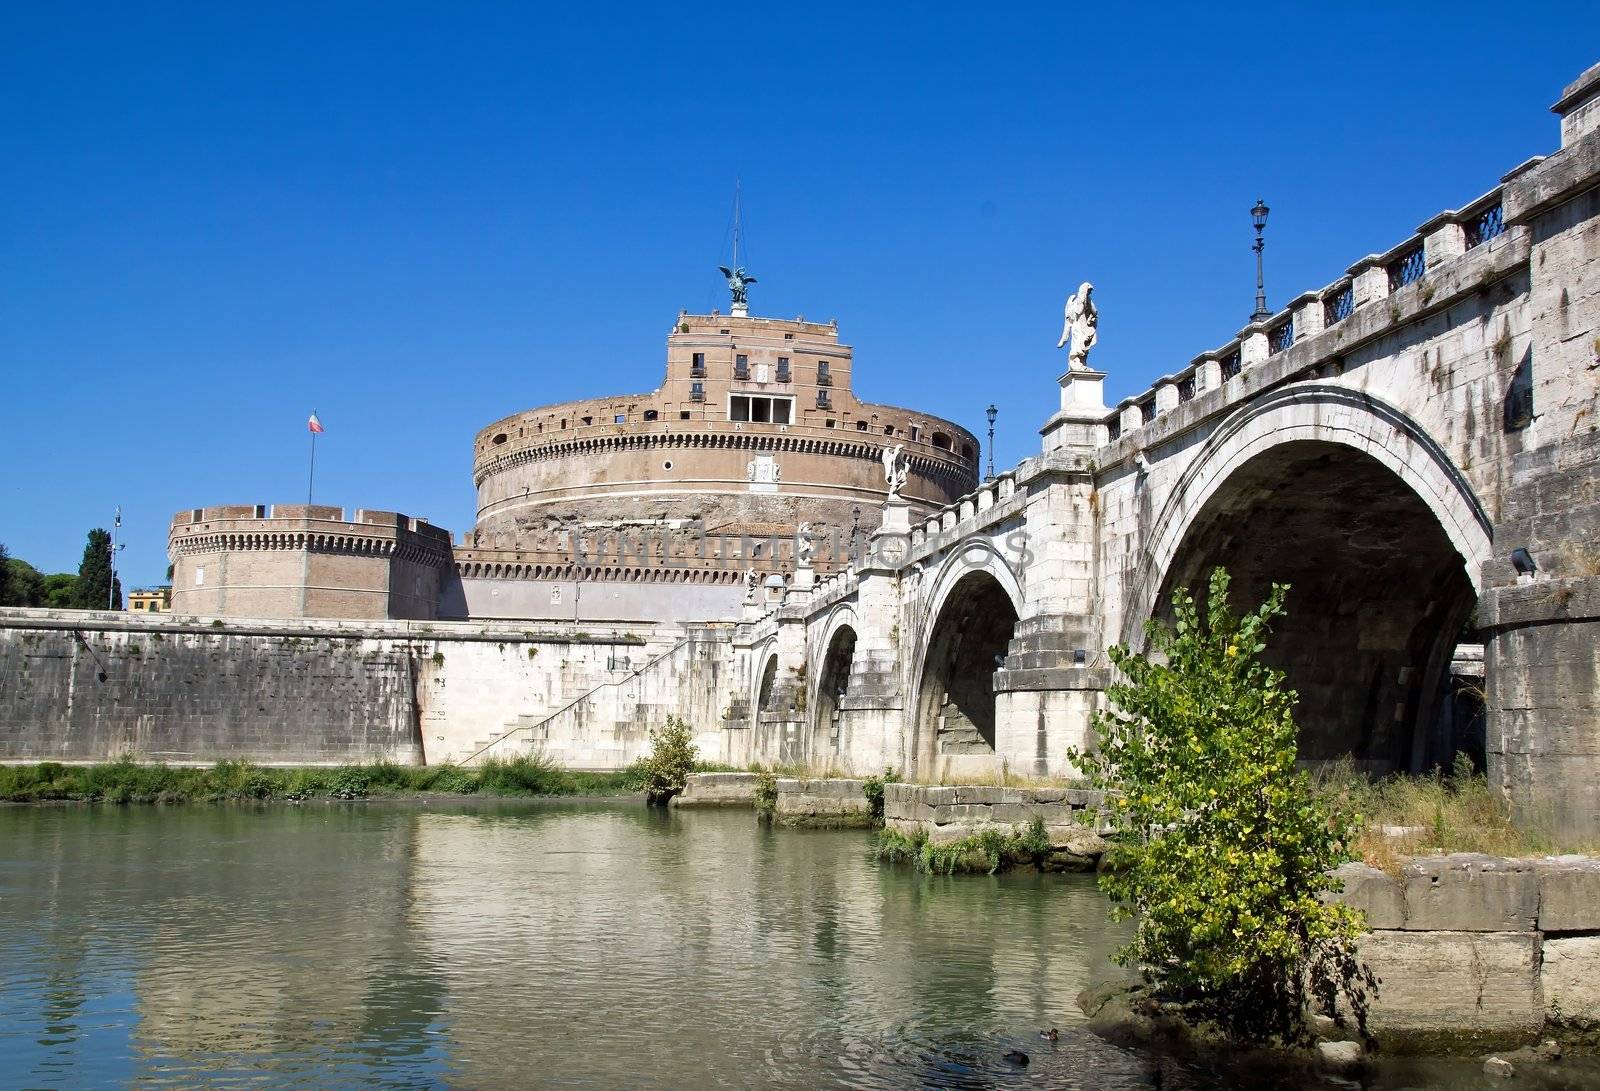 St Angel Castle and bridge, seen from one bank of the Tiber (Rome Italy)